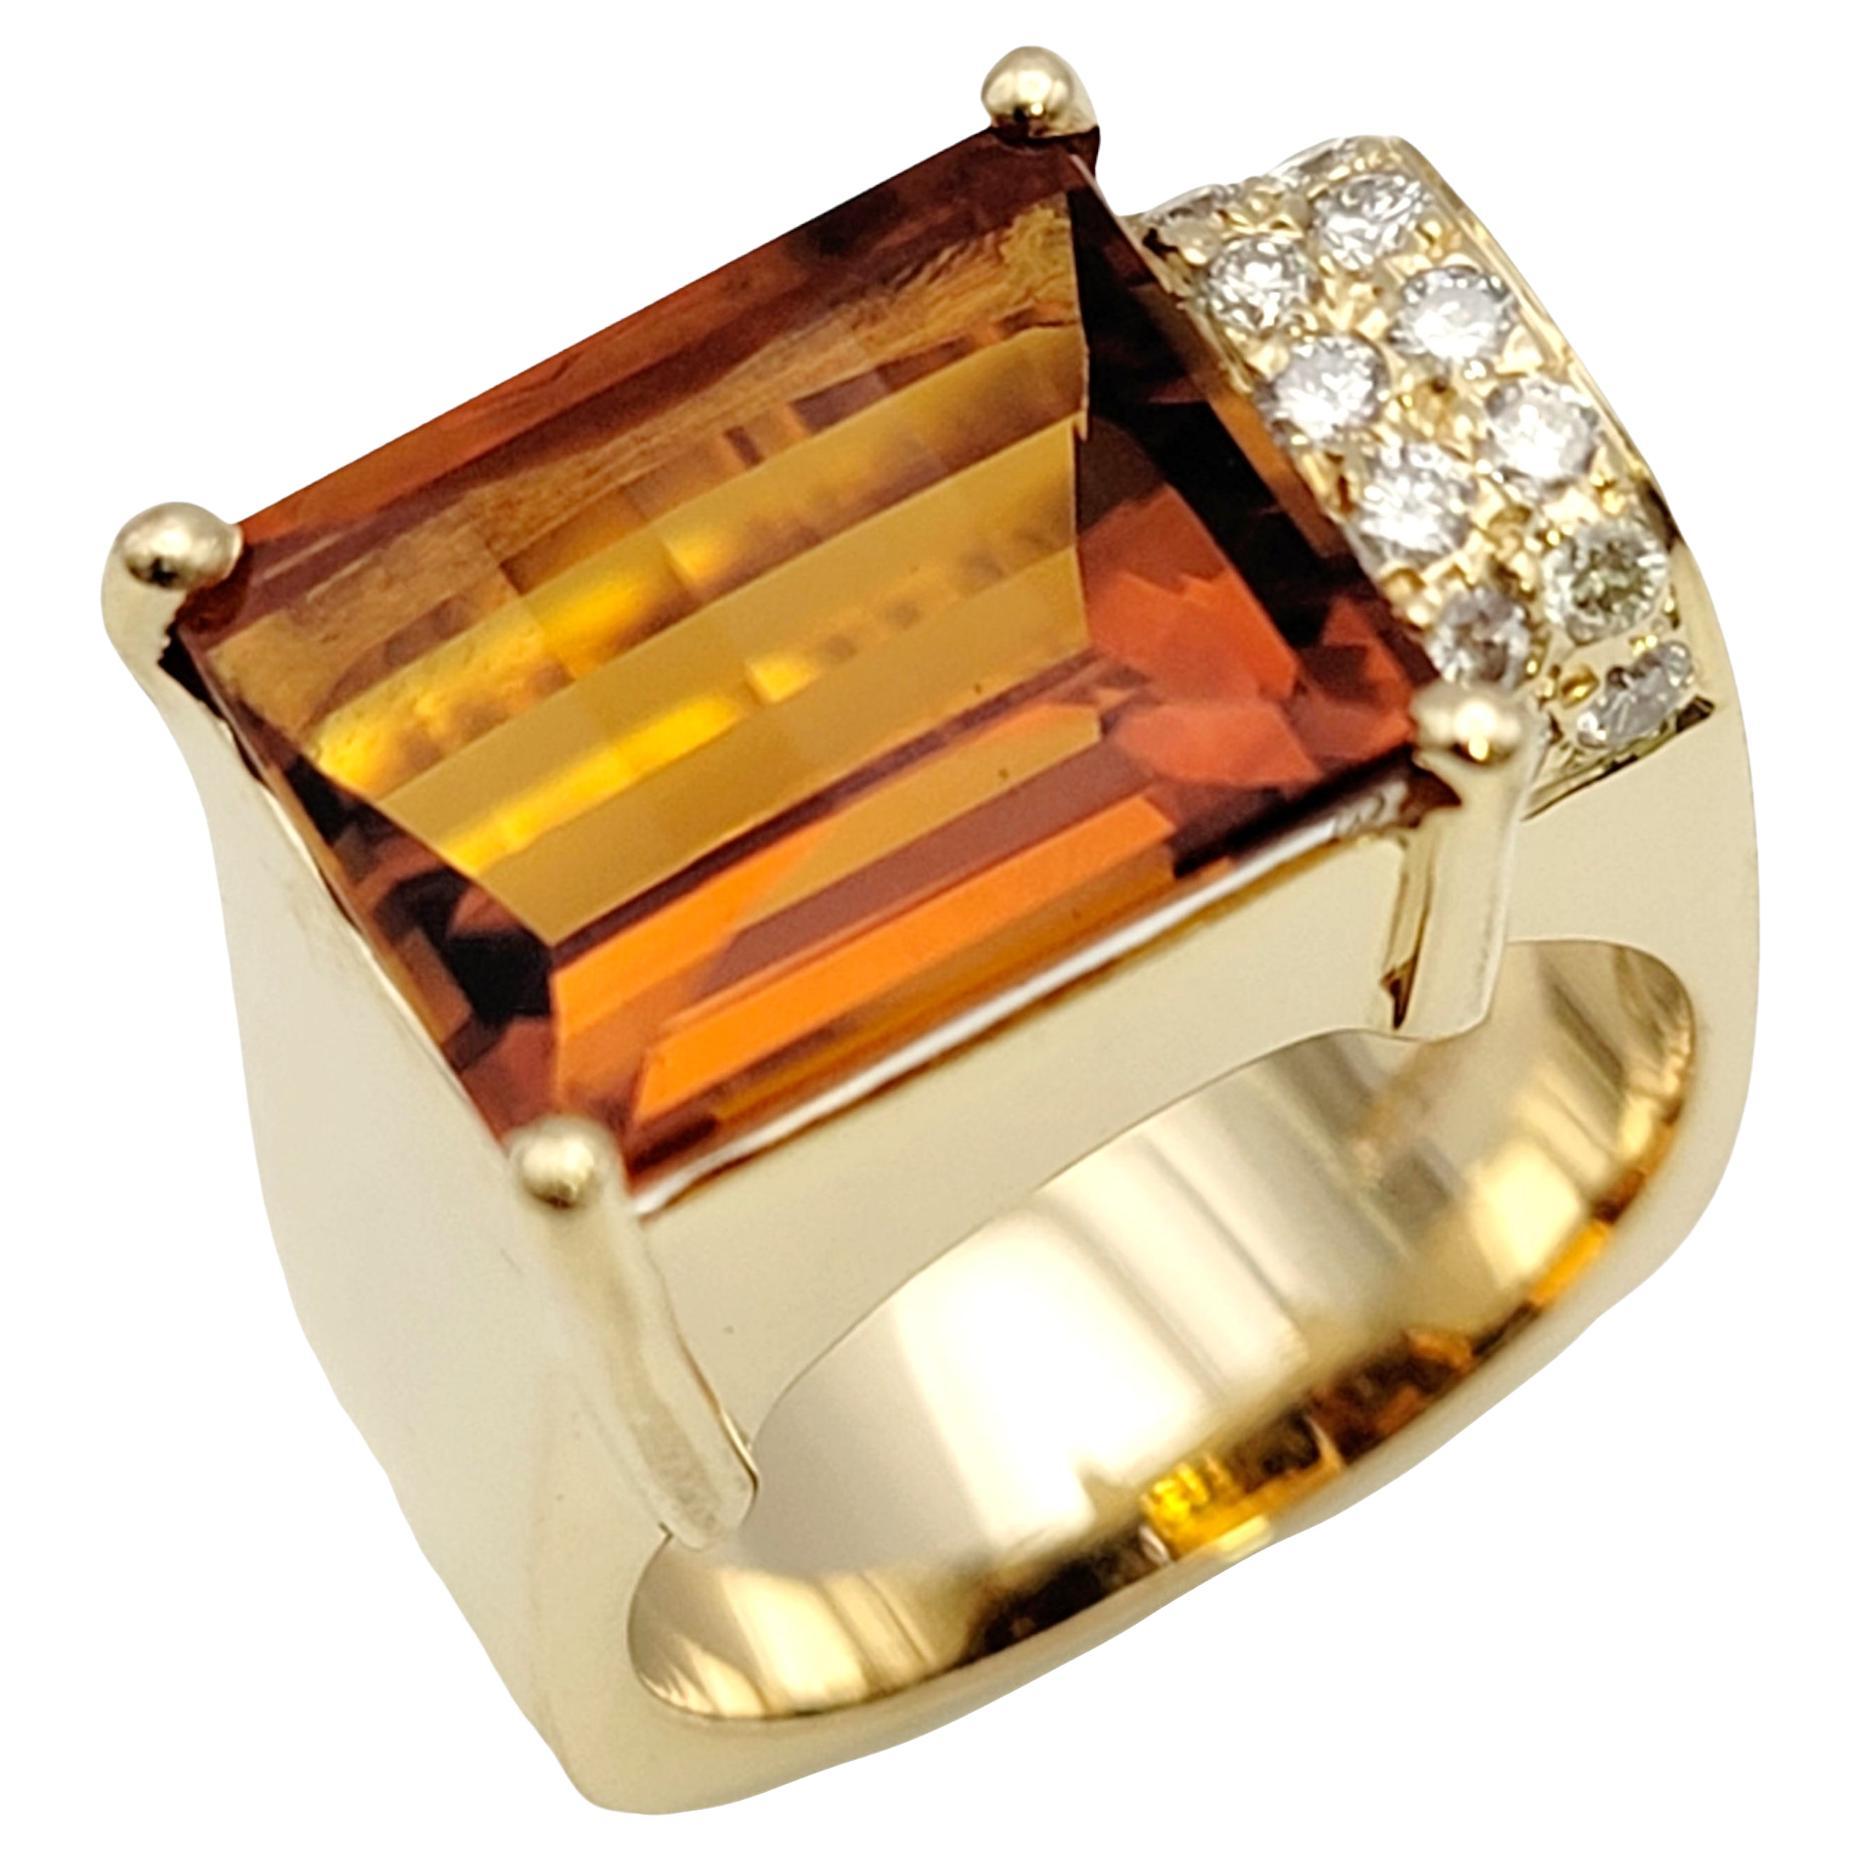 Ring size: 6.5

Gorgeous contemporary citrine and pave diamond ring. The rectangular cut vibrant orange citrine is prong set in a horizontal layout, filling the finger with sparkle. Set off to one side of the orange gemstone are two small rows of